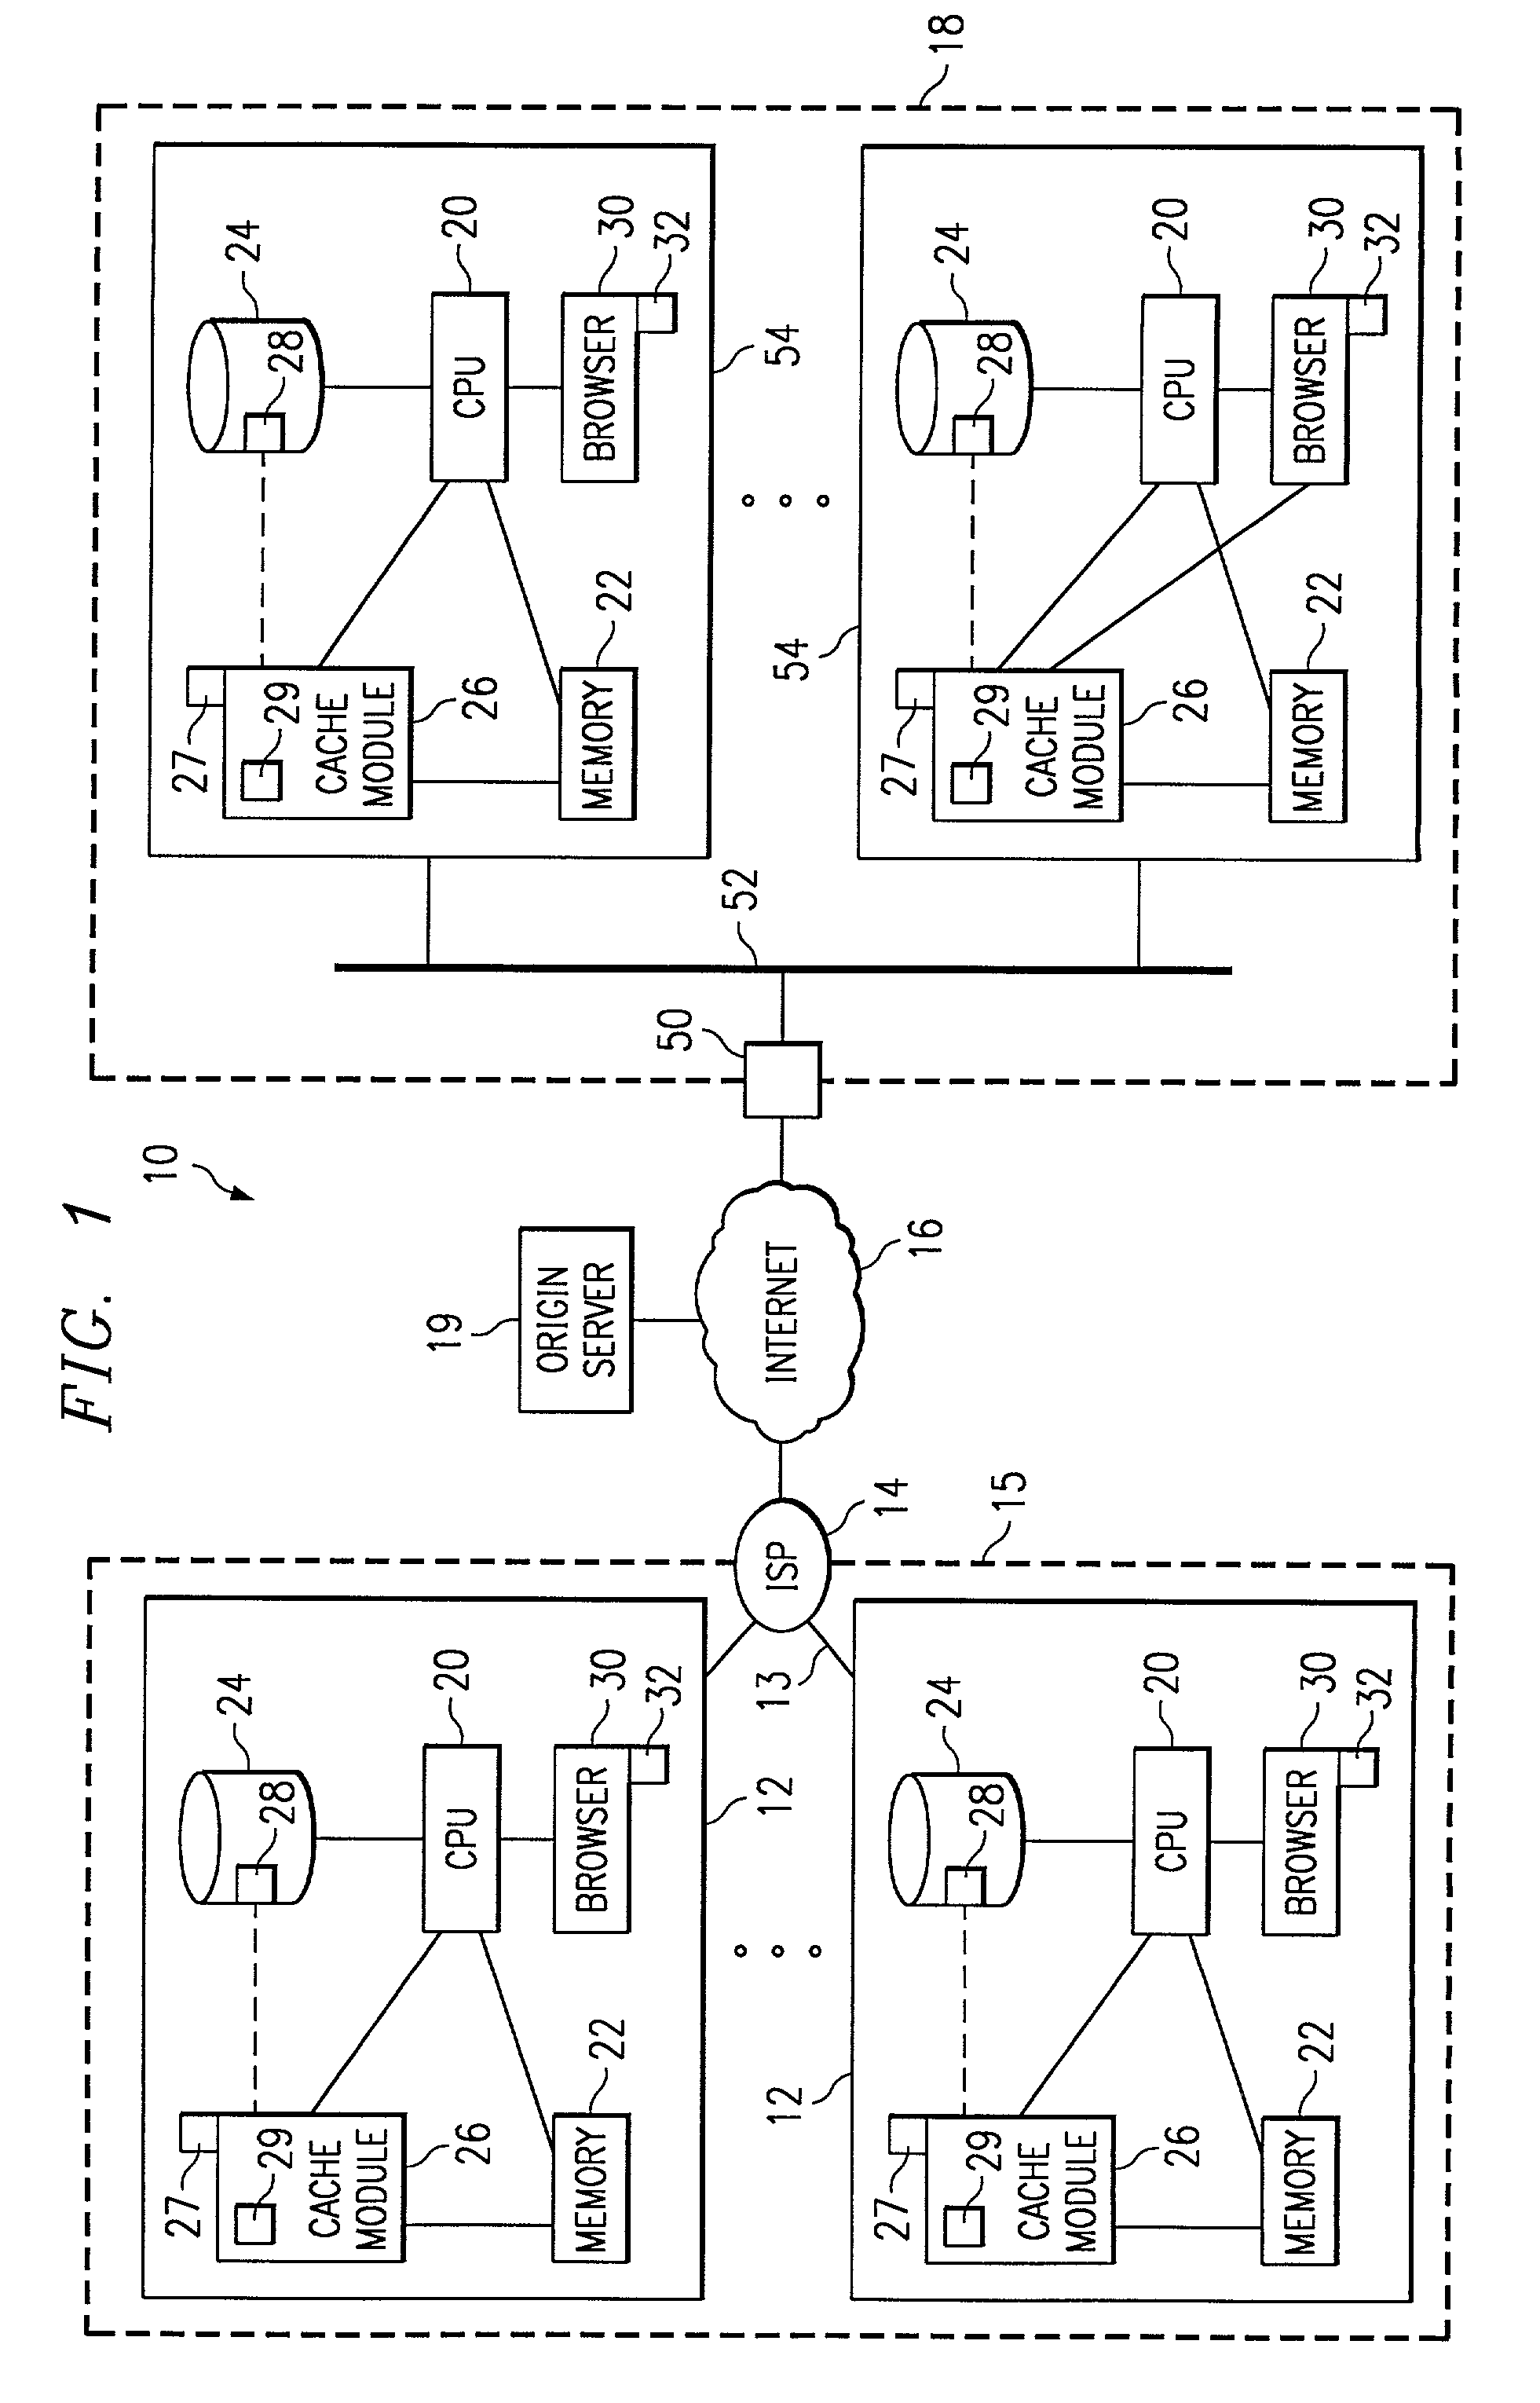 Method and system for community data caching